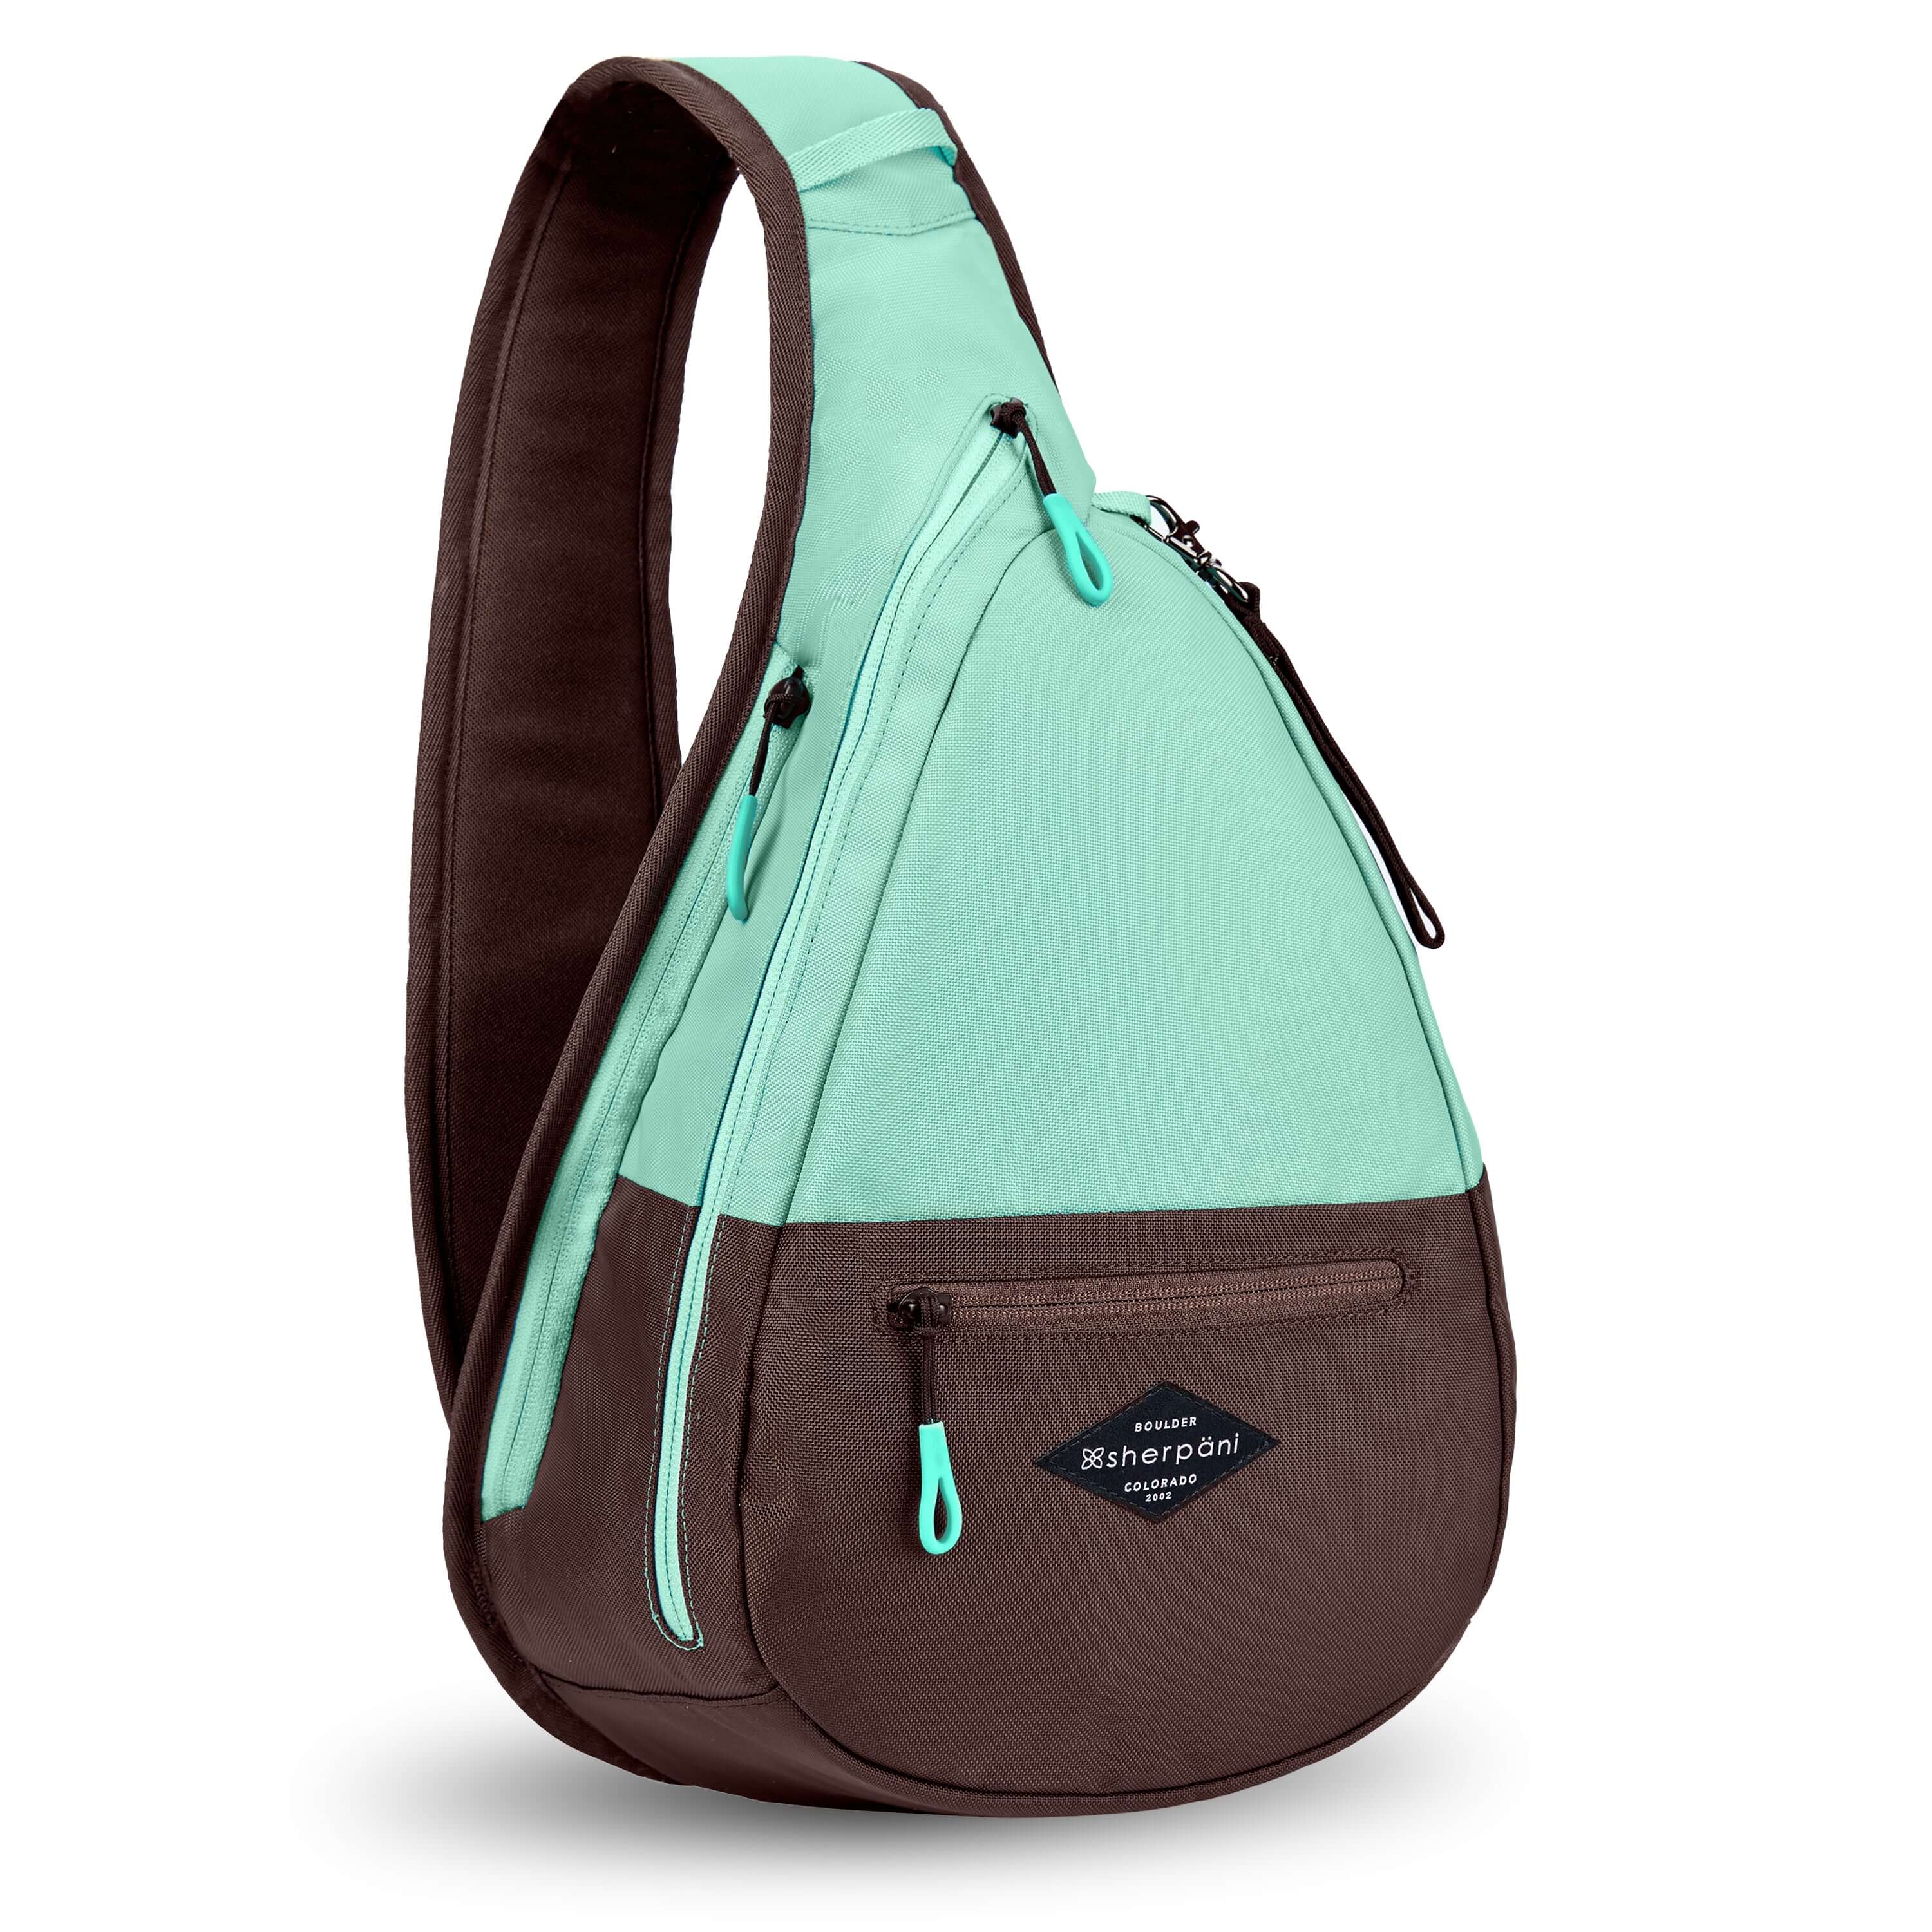 Angled front view of Sherpani's bag, the Esprit in Seagreen. The teardrop shaped bag is two-toned in light green and brown. There is a small zipper pocket on the front of the bag, the main zipper compartment in the middle, and another zipper pocket towards the back of the bag. It has easy-pull zippers accented in light green. A branded Sherpani keychain is clipped to a fabric loop near the top of the bag. 